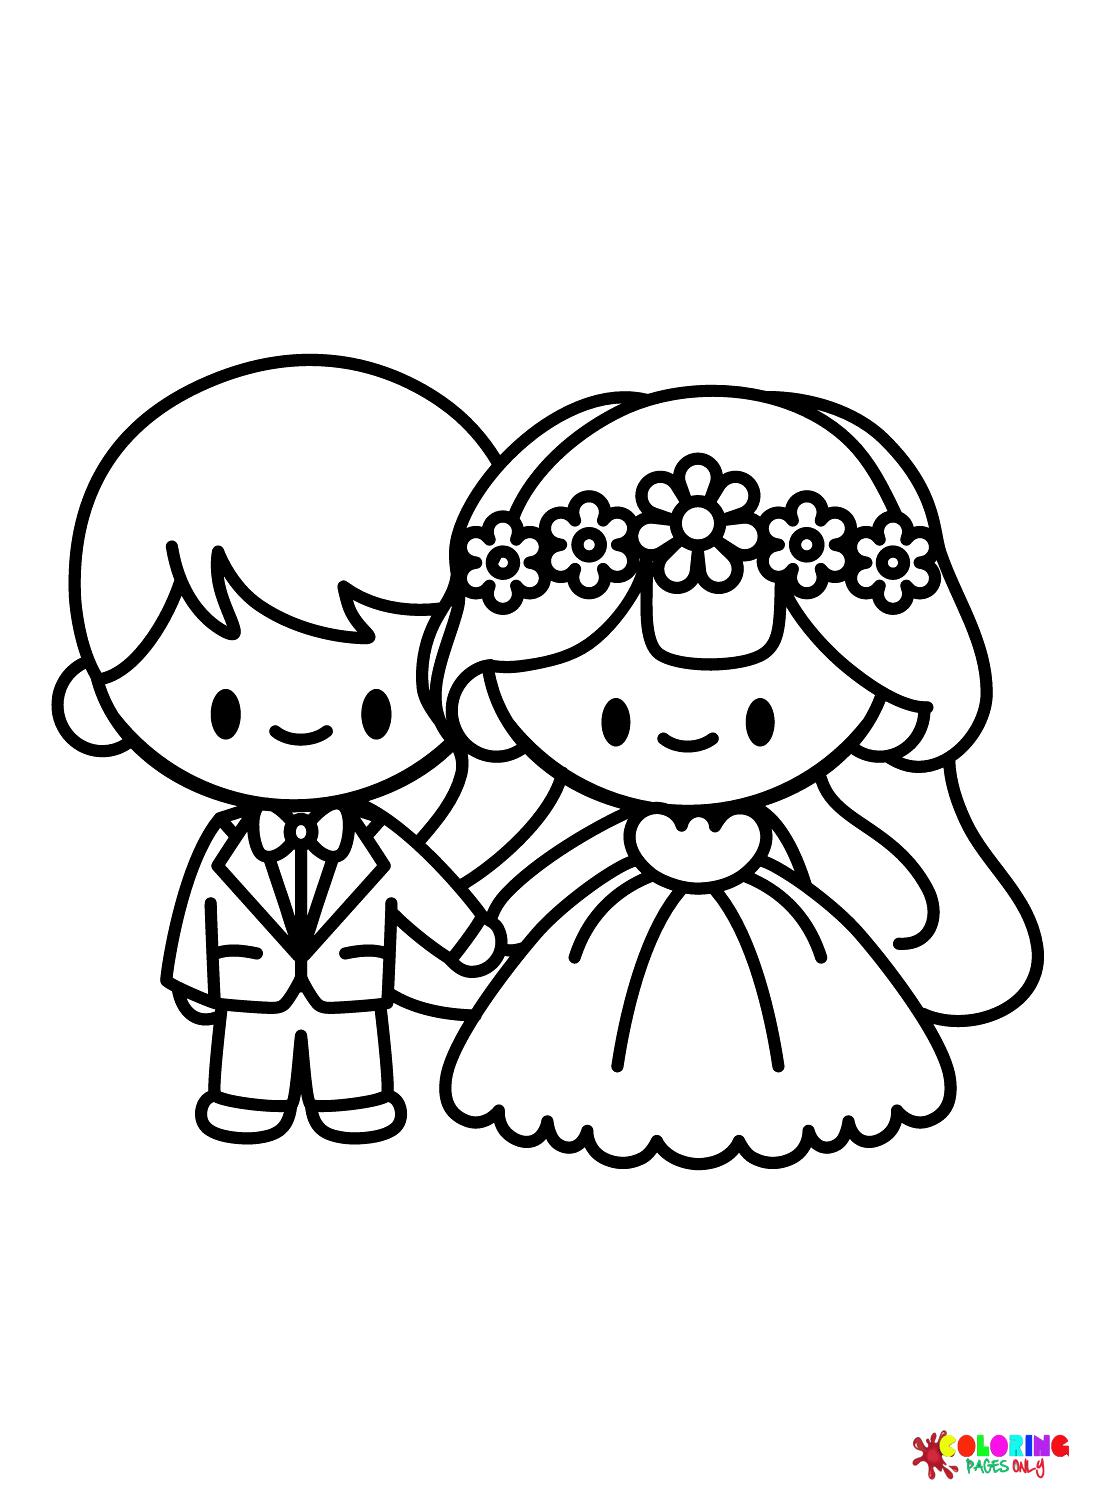 Chibi Bride and Groom Coloring Page